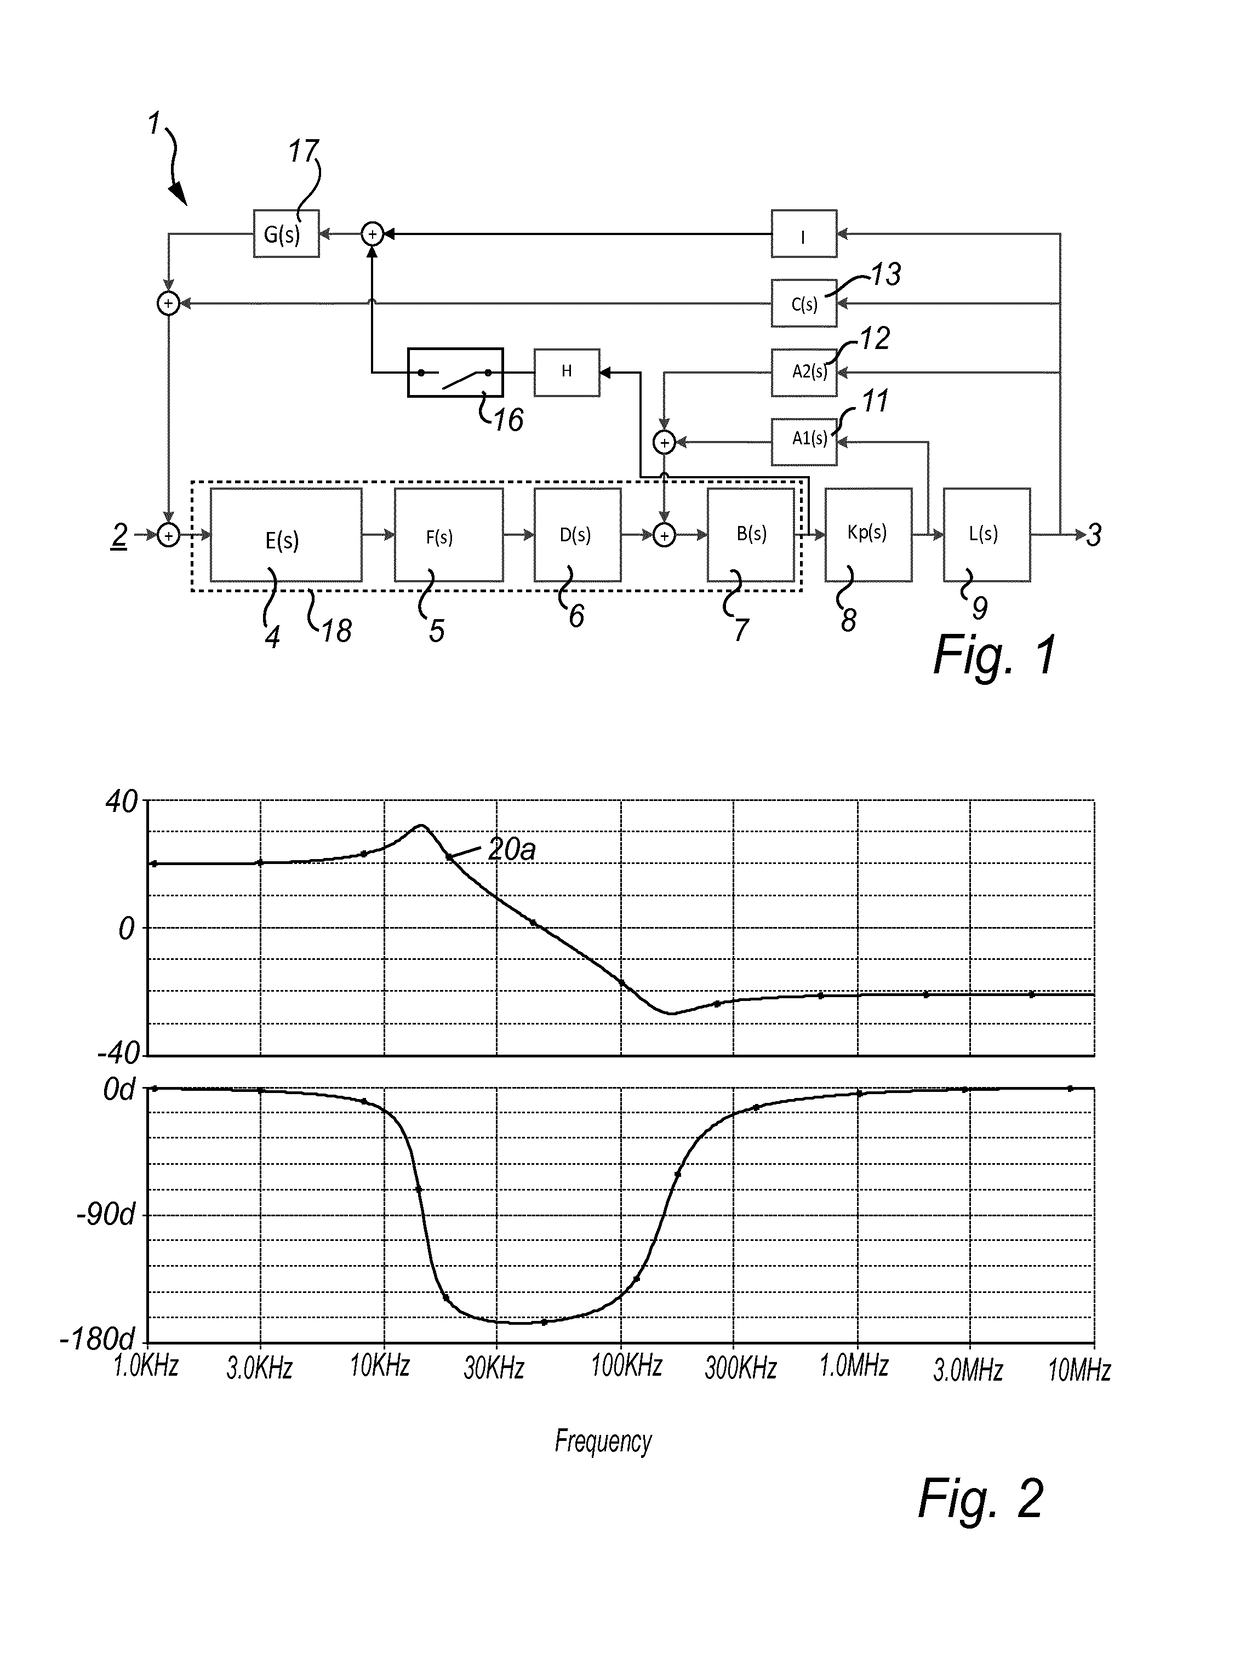 Self-oscillating amplifier with high order loop filter